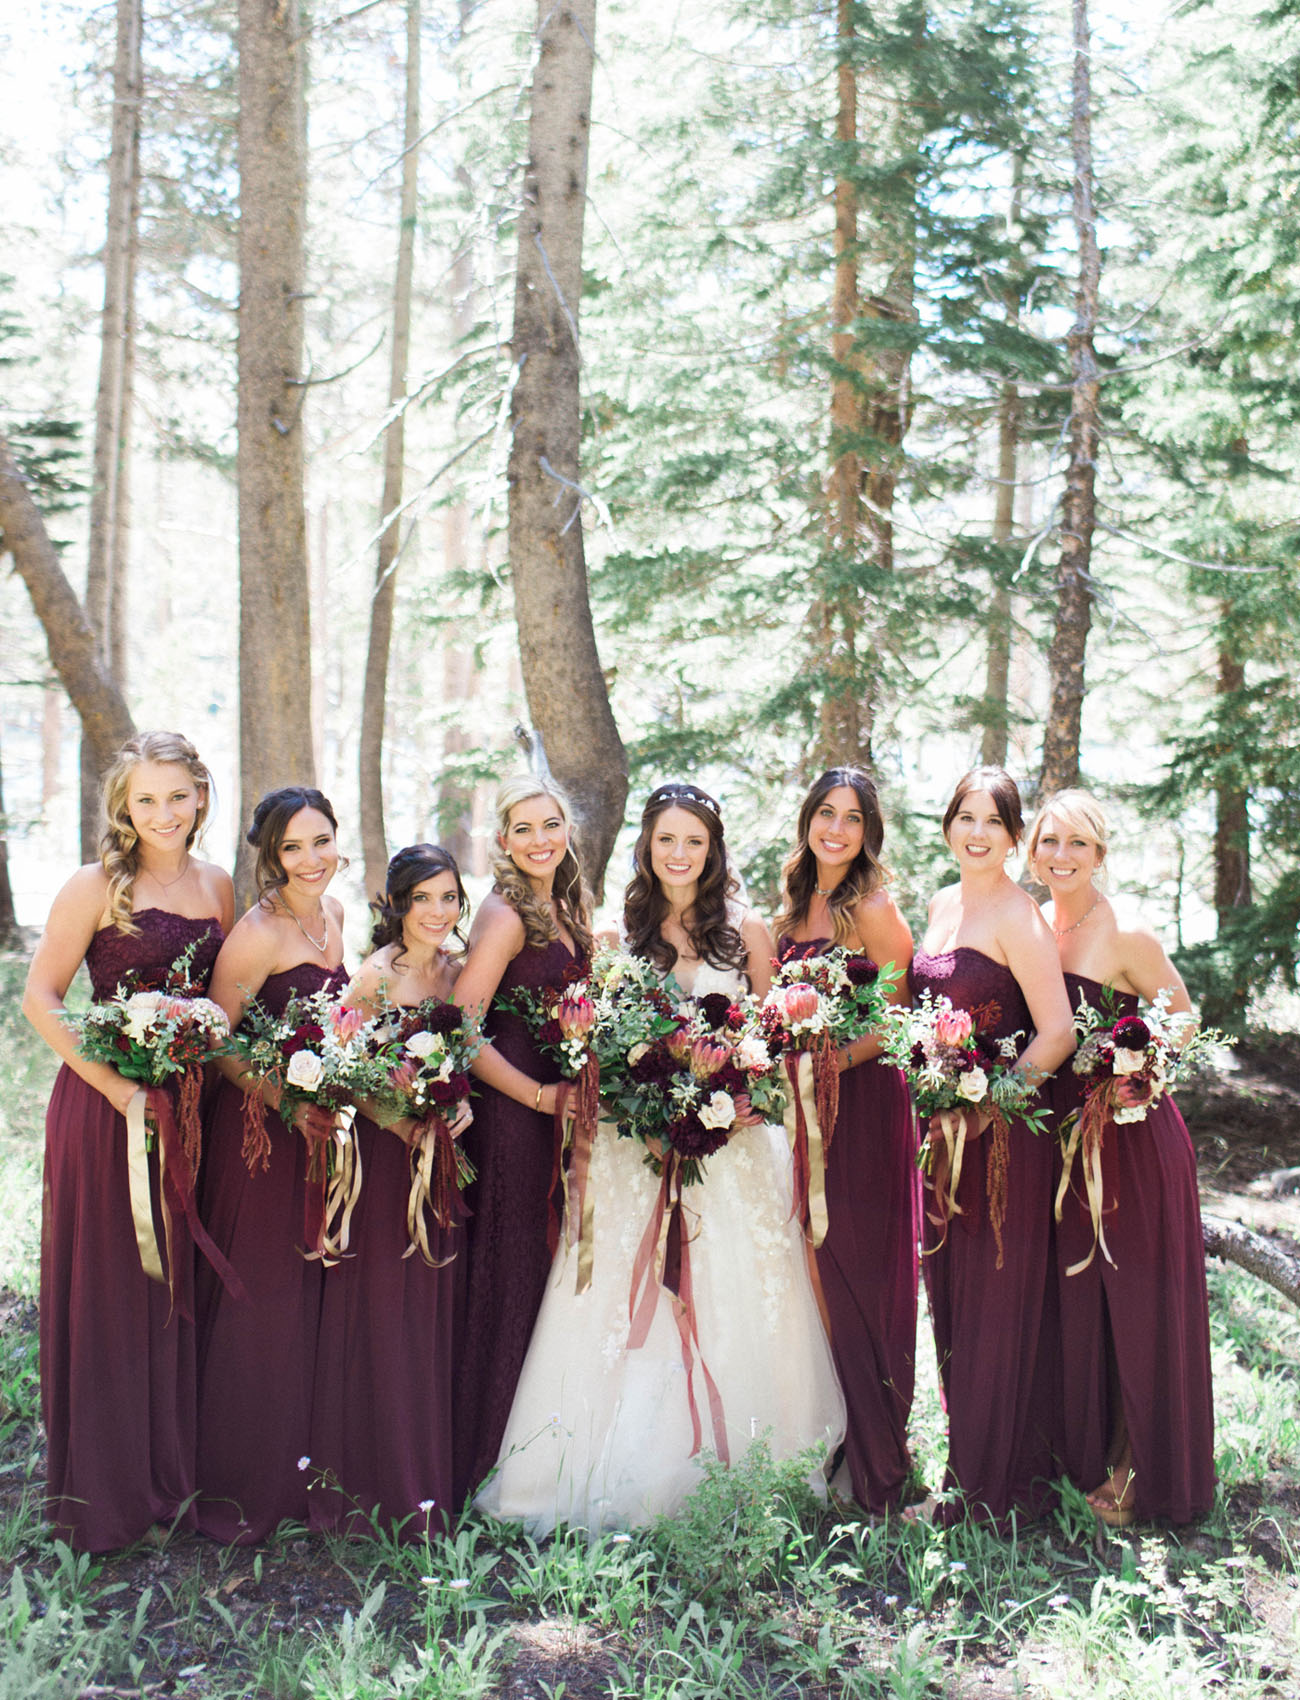 Strapless burgundy bridesmaid dresses with burgundy accent bouquets and ribbon. // Burgundy Bridesmaid Dresses Ideas // https://mysweetengagement.com/burgundy-bridesmaid-dresses/ 